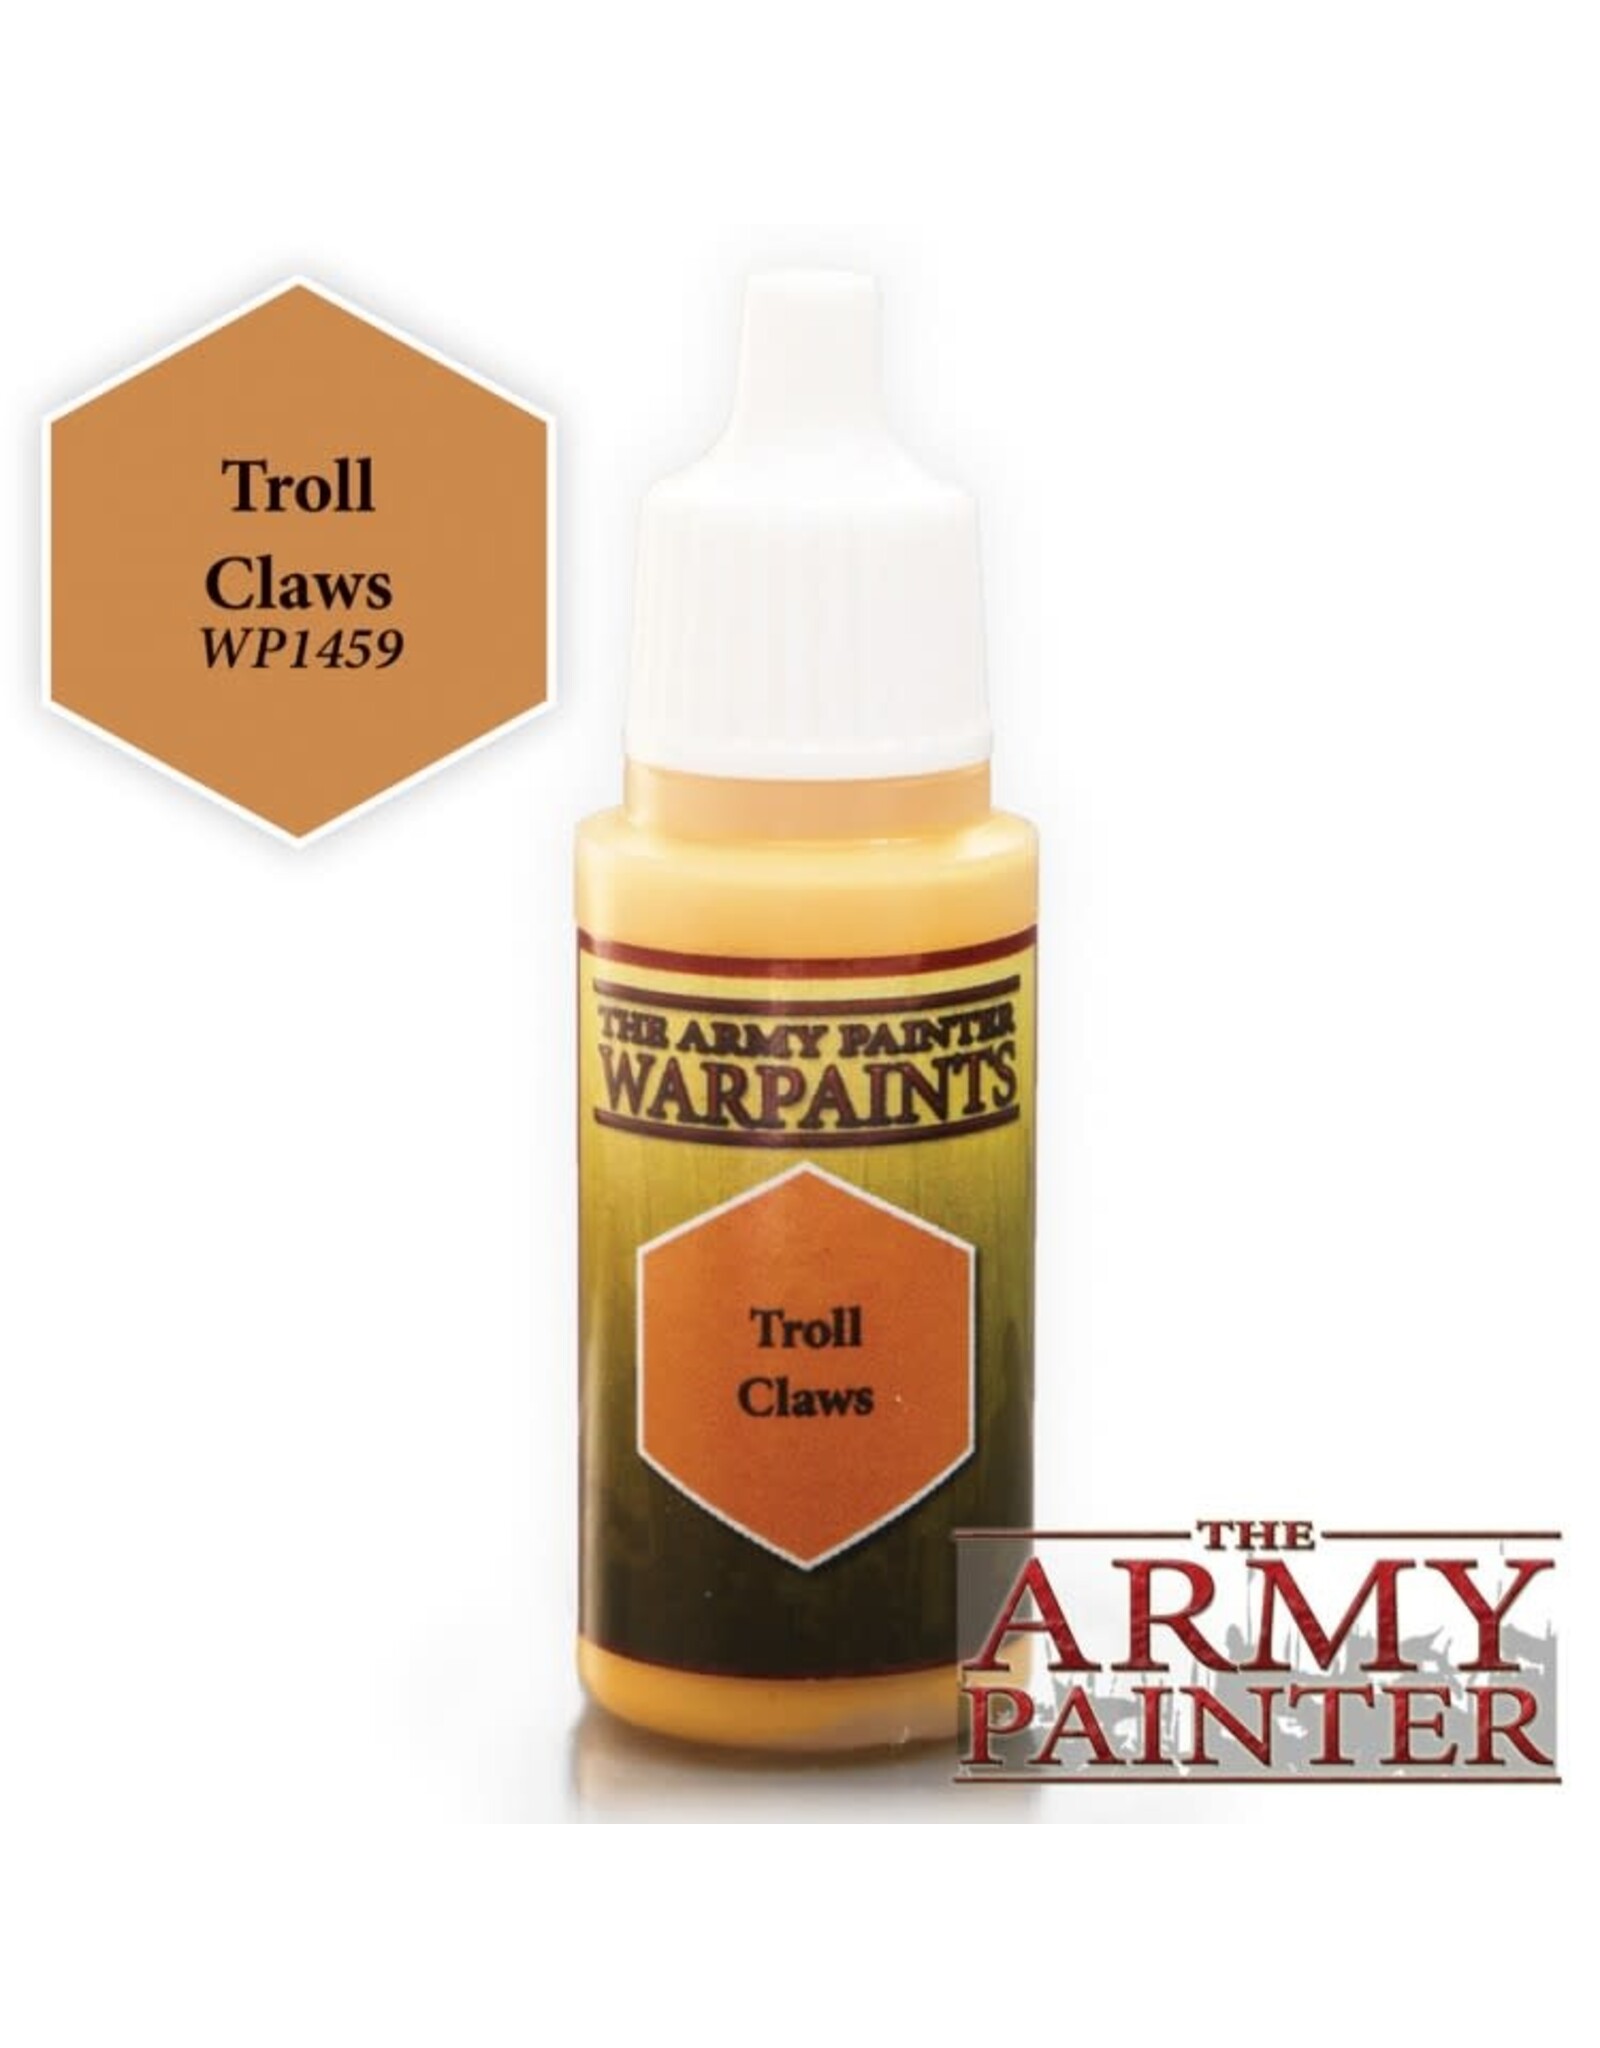 Army Painter Warpaints: Troll Claws